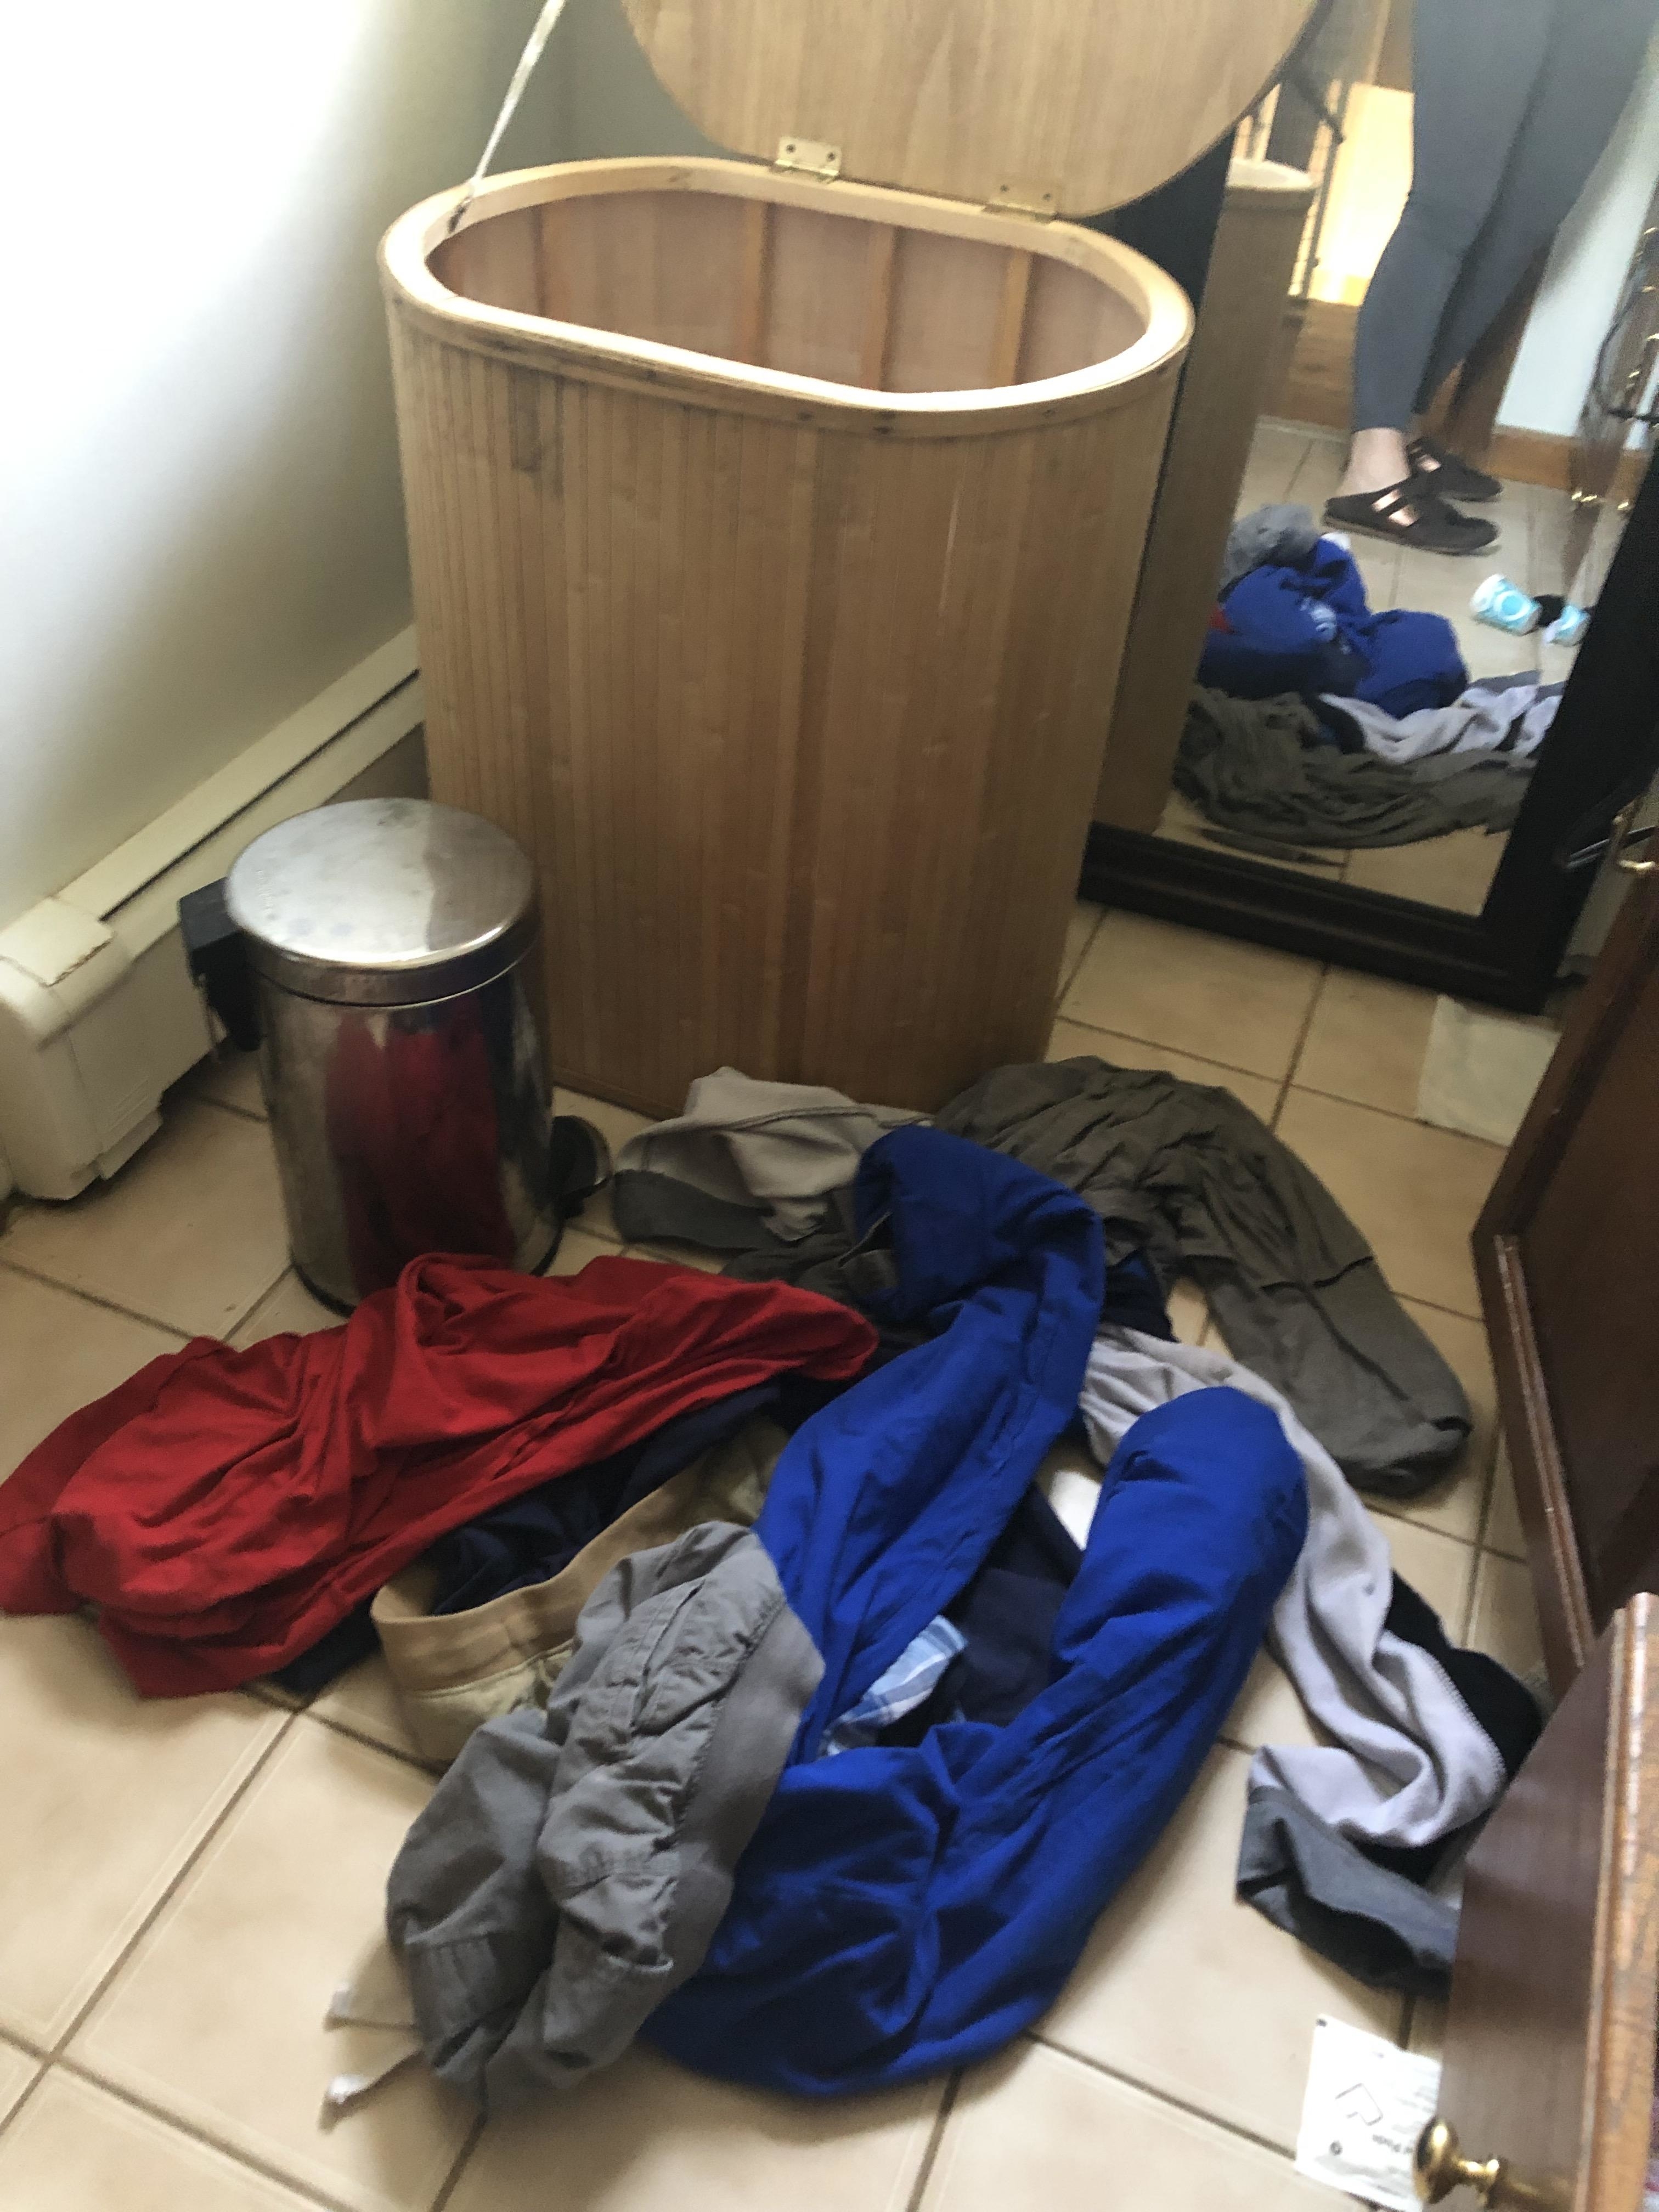 A cluttered room with clothes scattered on the floor and an open laundry hamper. Reflection of a person in the mirror